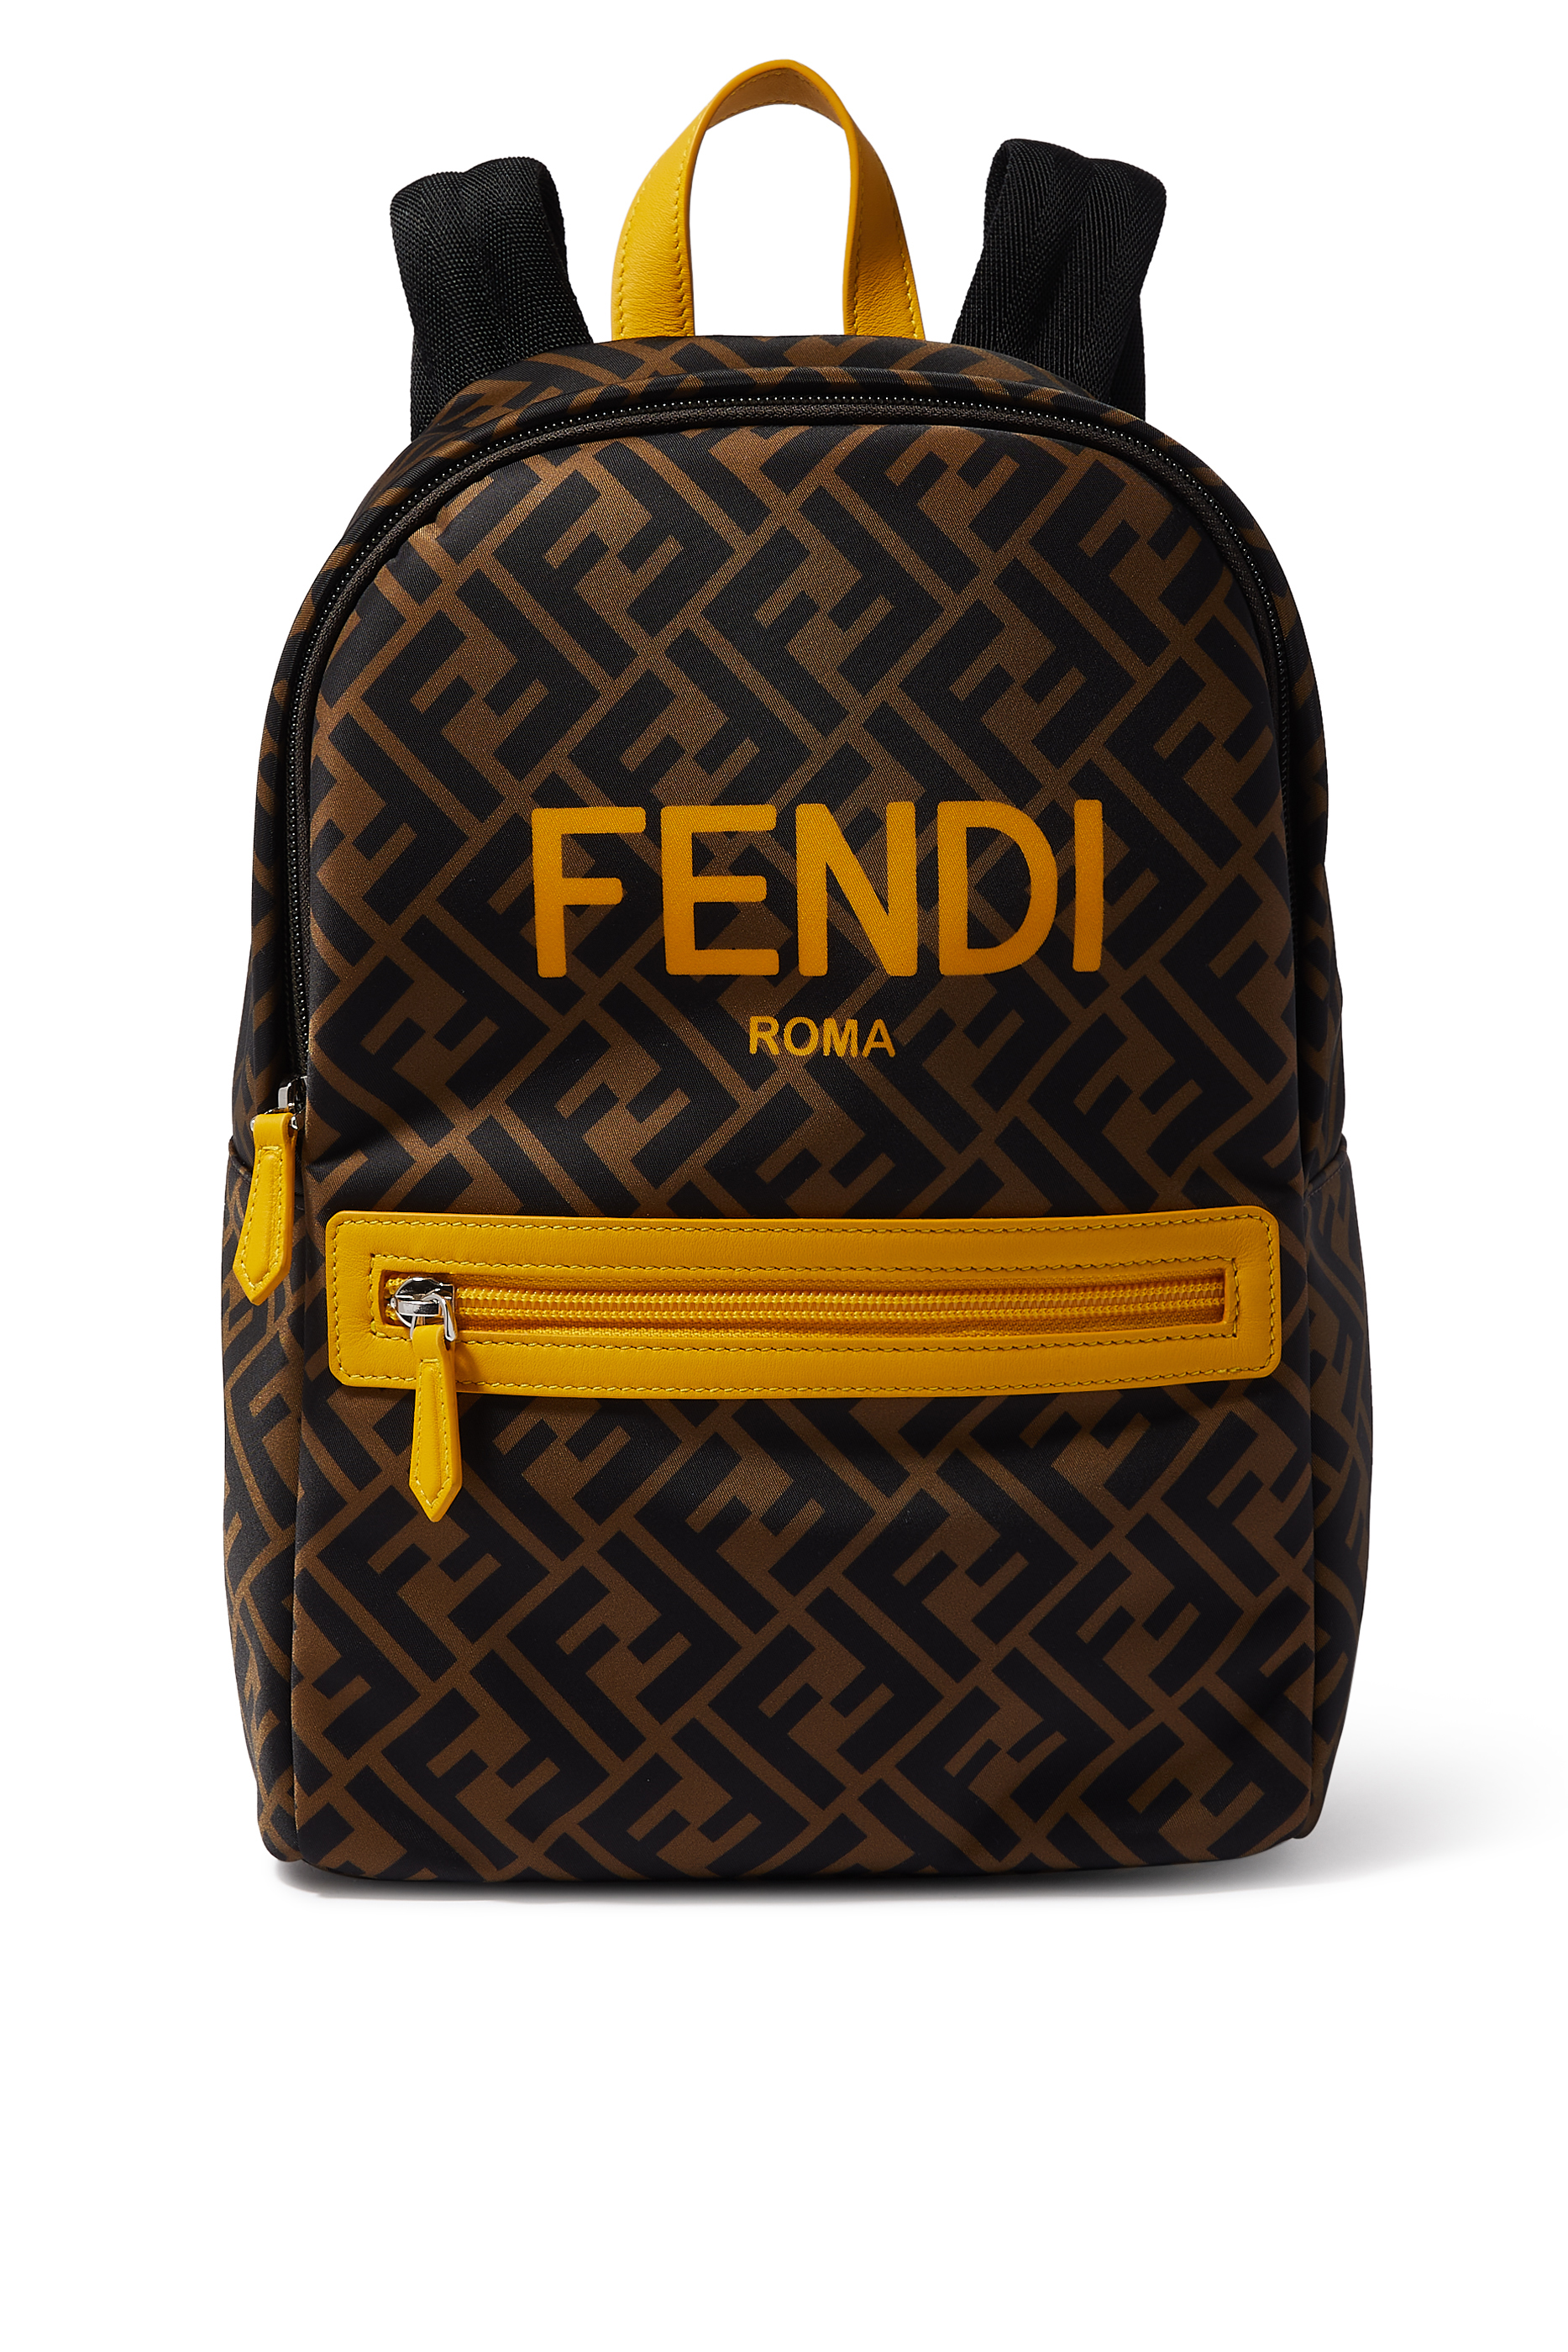 Sold at Auction: FENDI - BACKPACK - FLORAL STUDDED SMALL CROSSBODY BAG -  SILVER METALLIC LEATHER